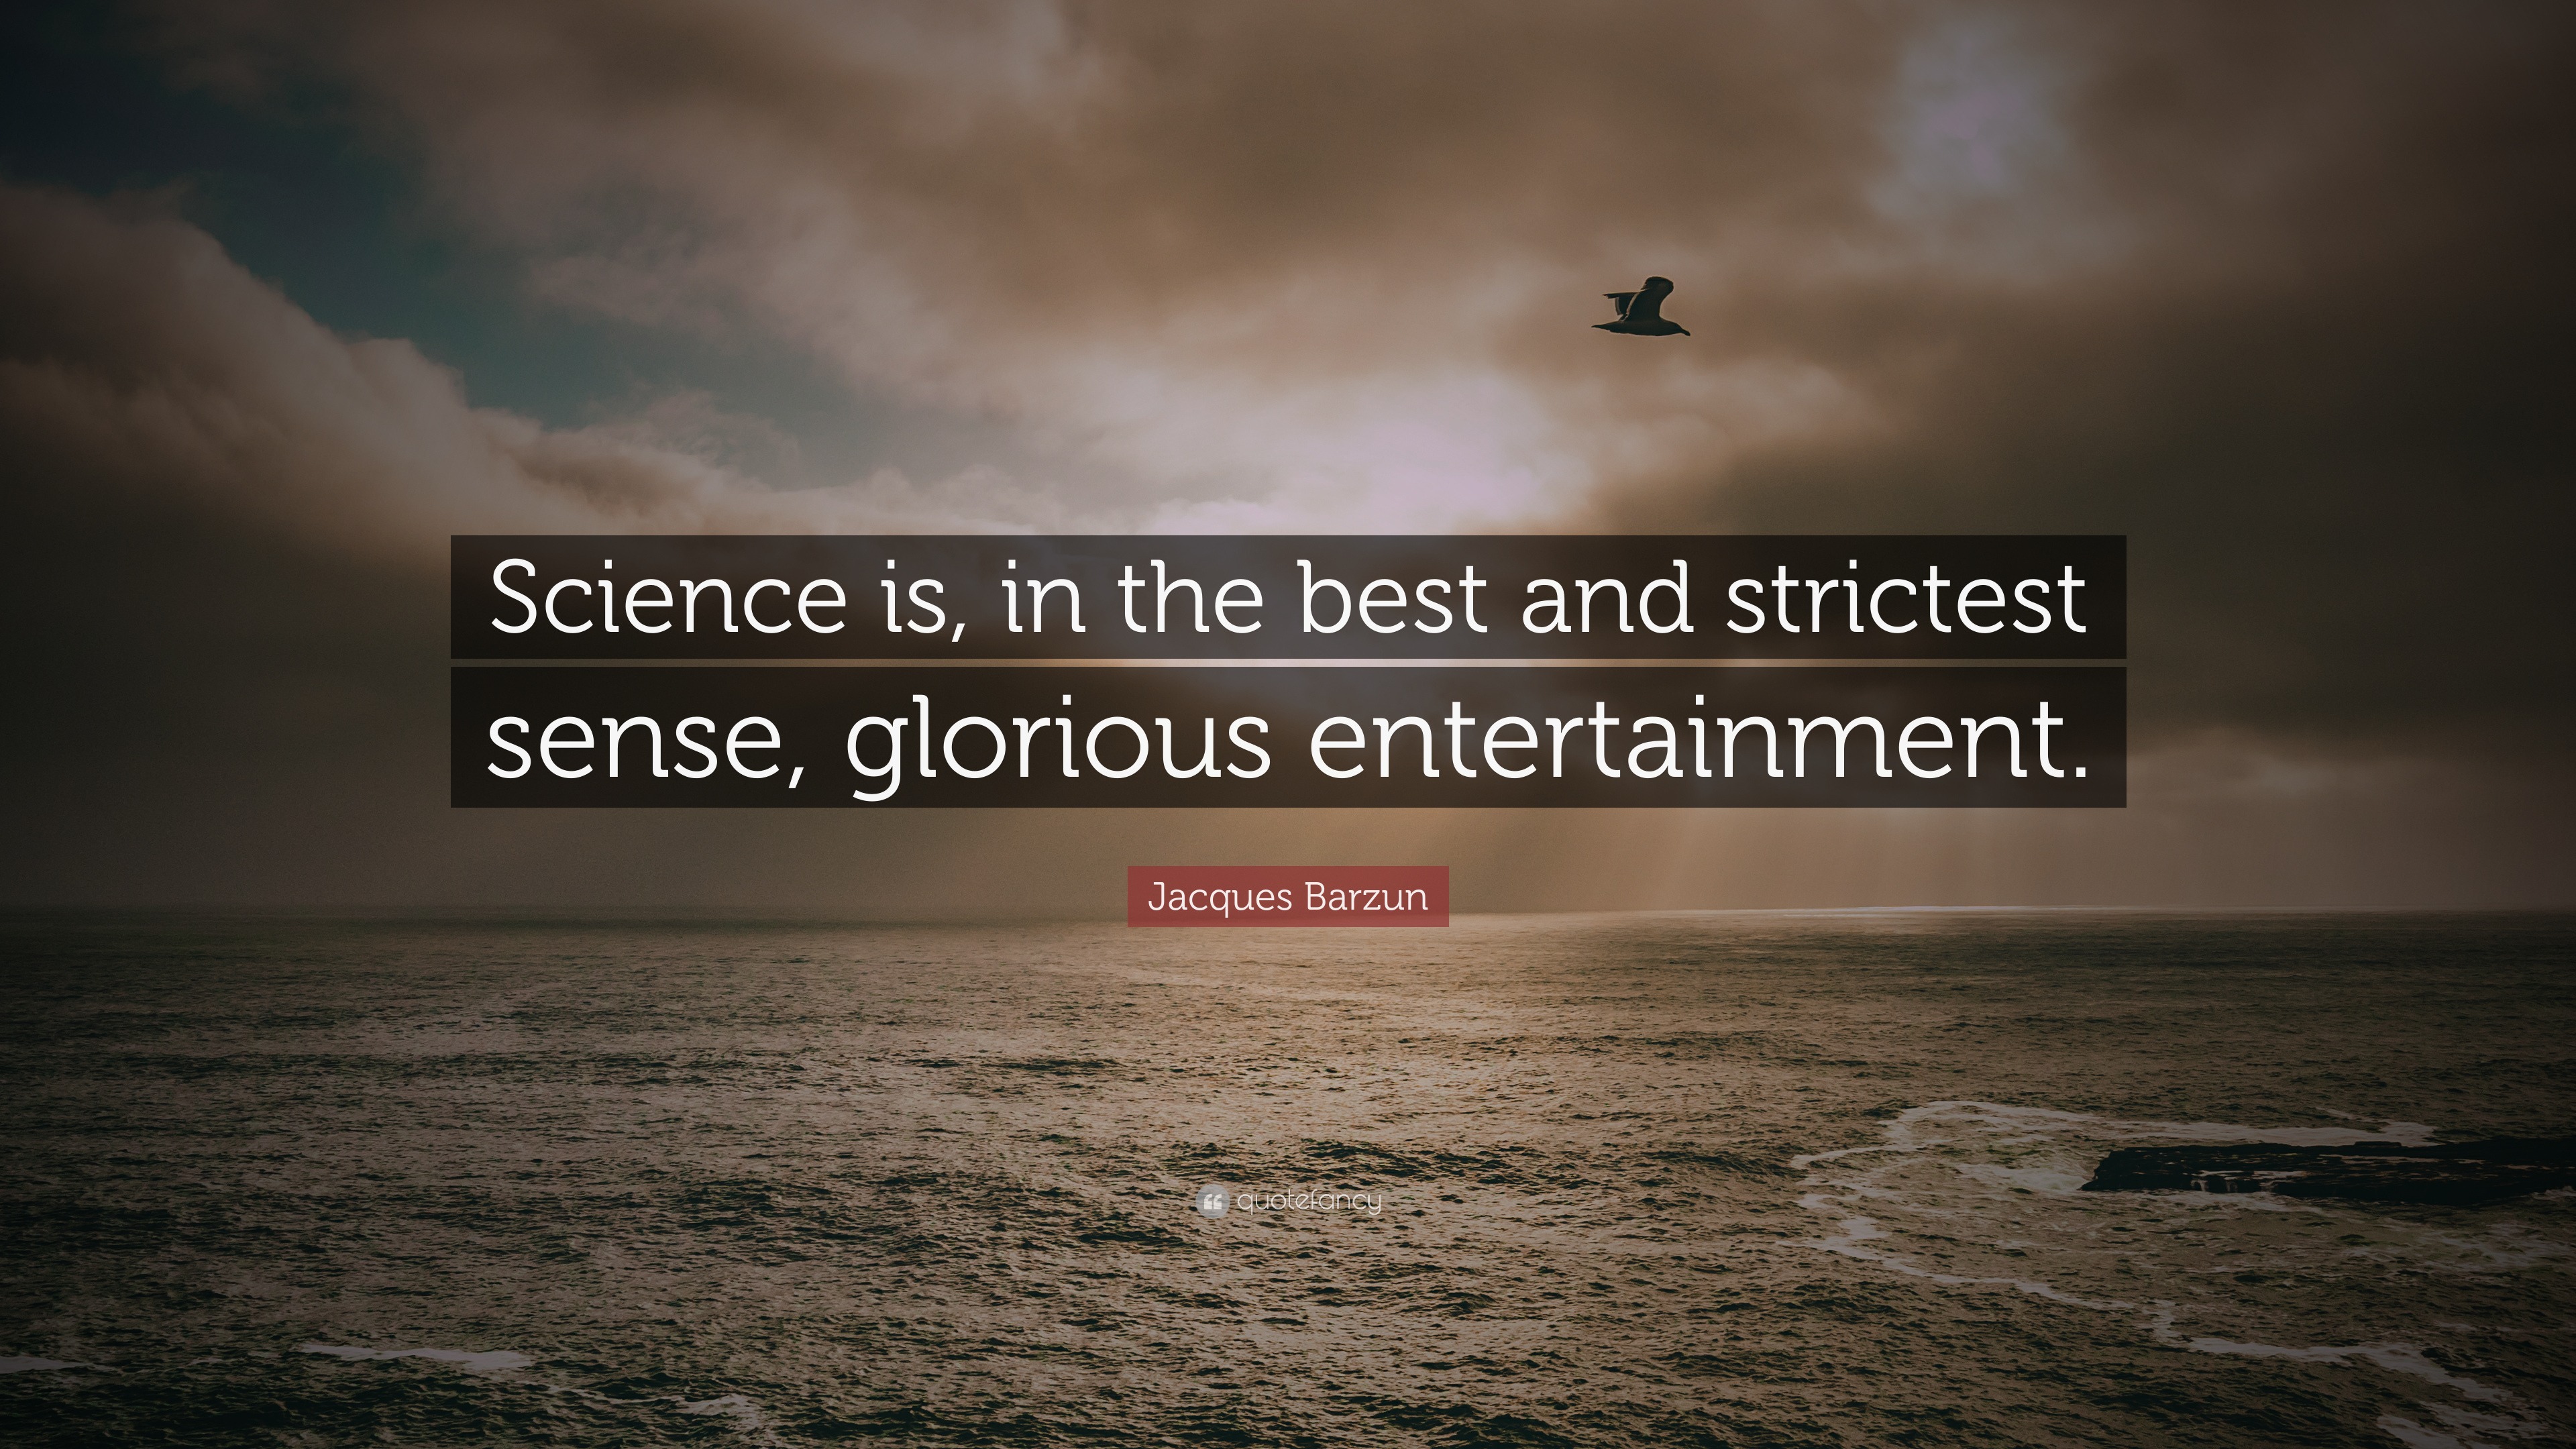 Science: The Glorious Entertainment.